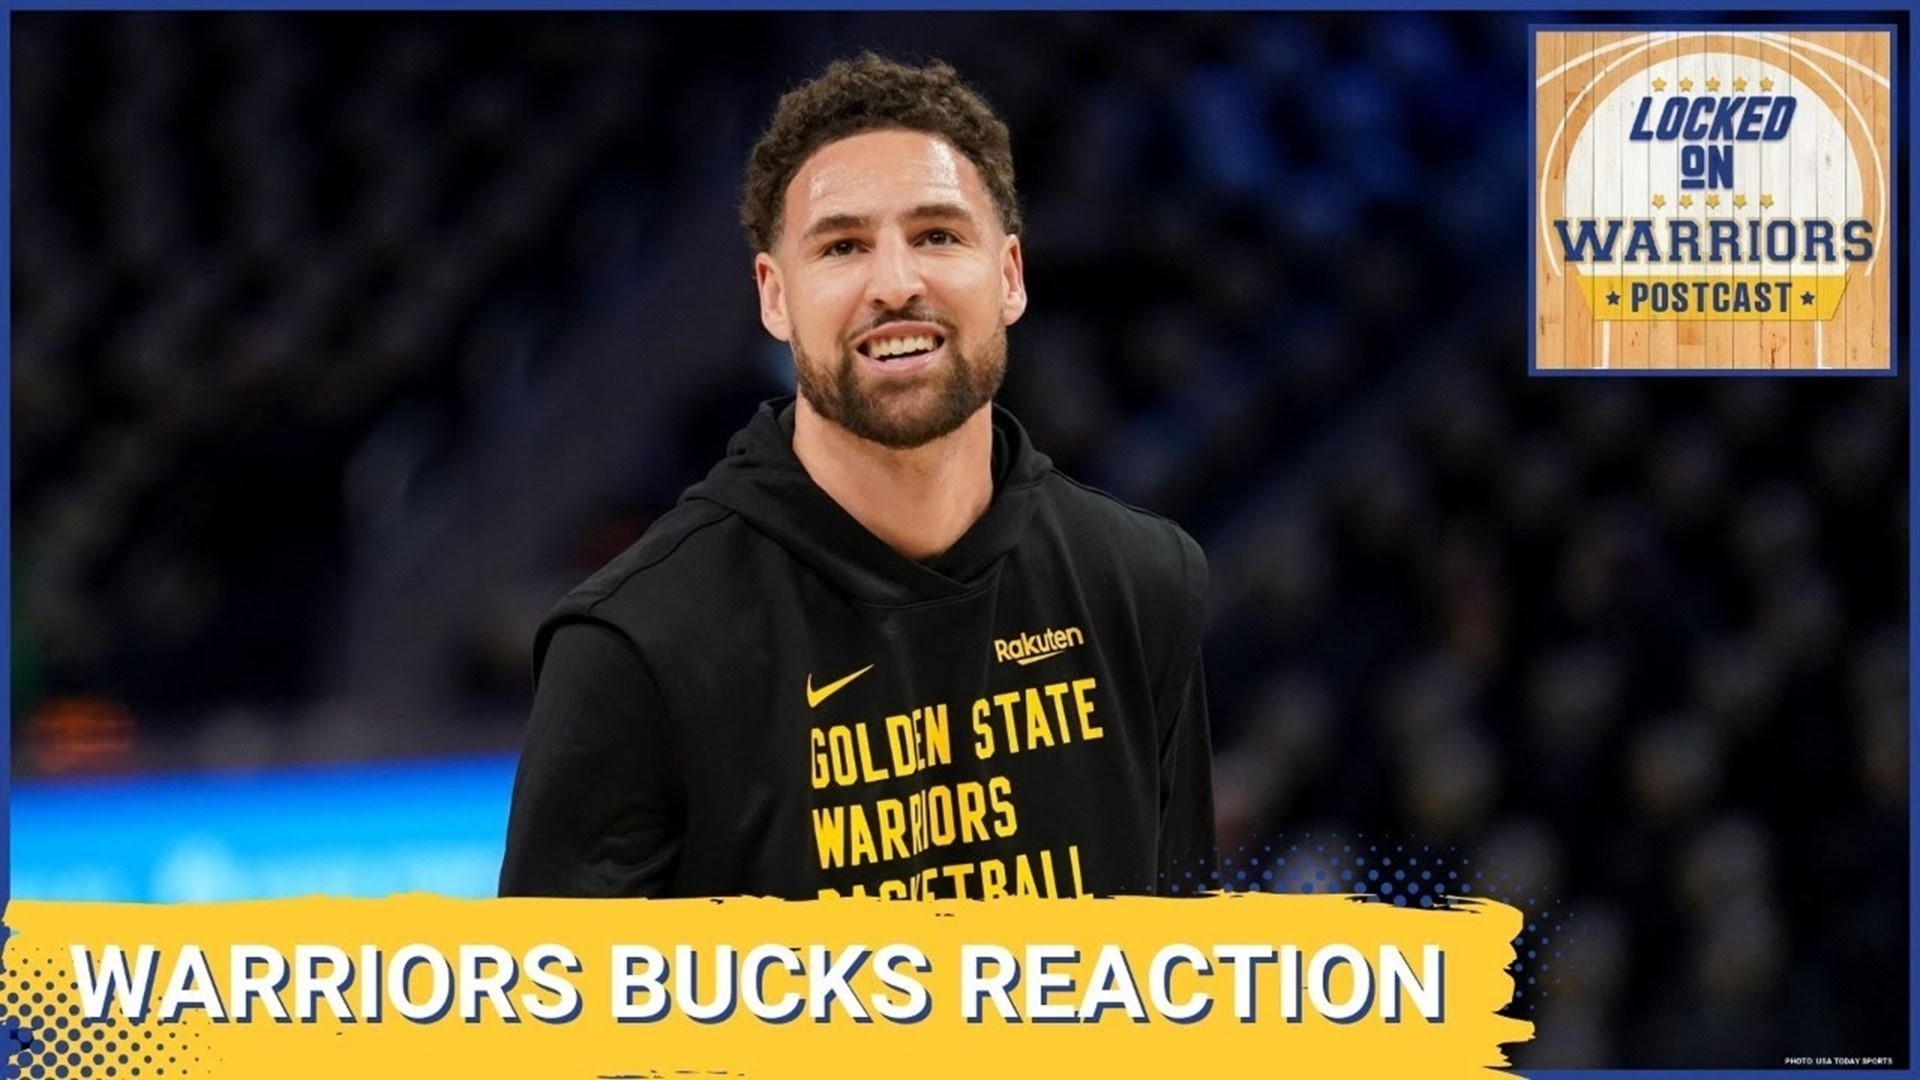 The Golden State Warriors bounced back from their beatdown in Boston as they defeated Giannis Antetokounmpo and the Milwaukee Bucks.